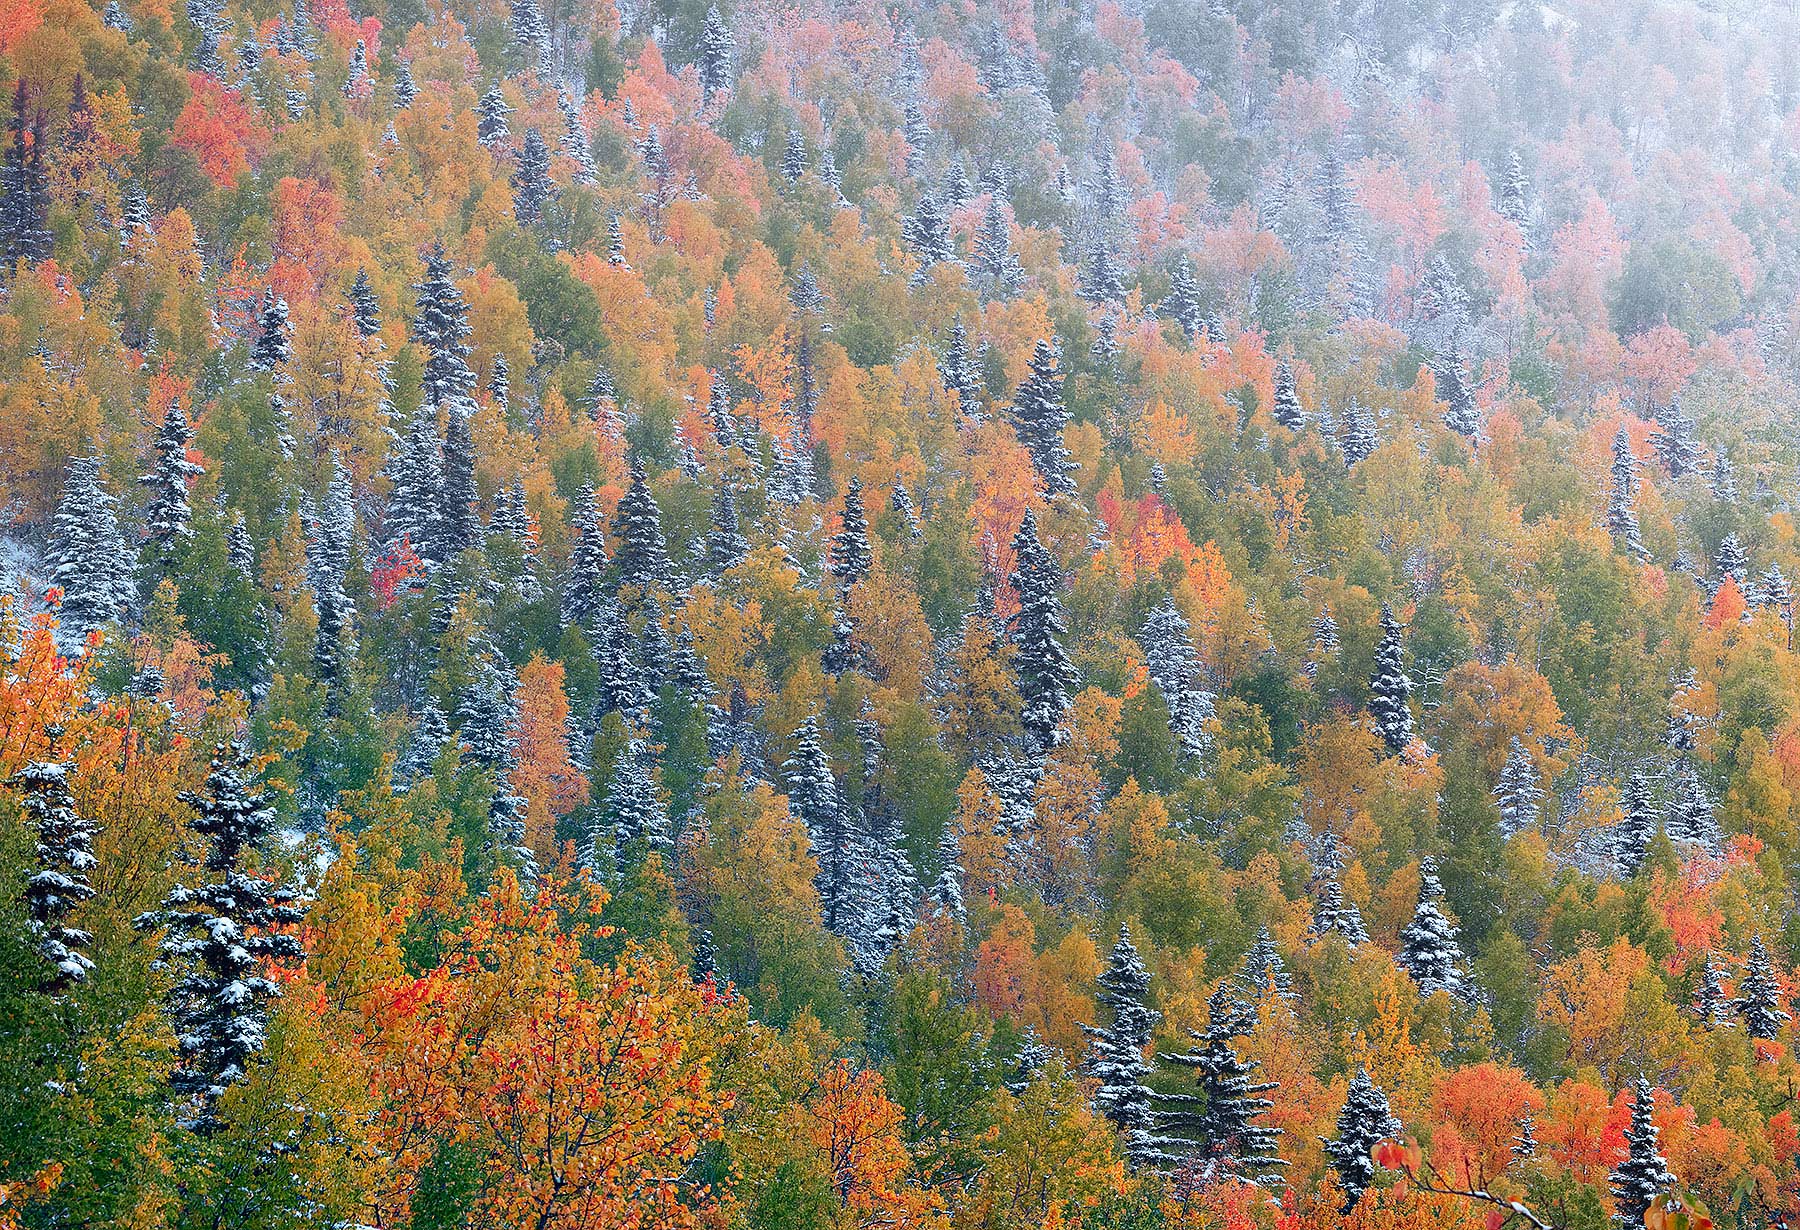 New snow clings to fir trees in Alaska as autumn colors disappear into the misty cold